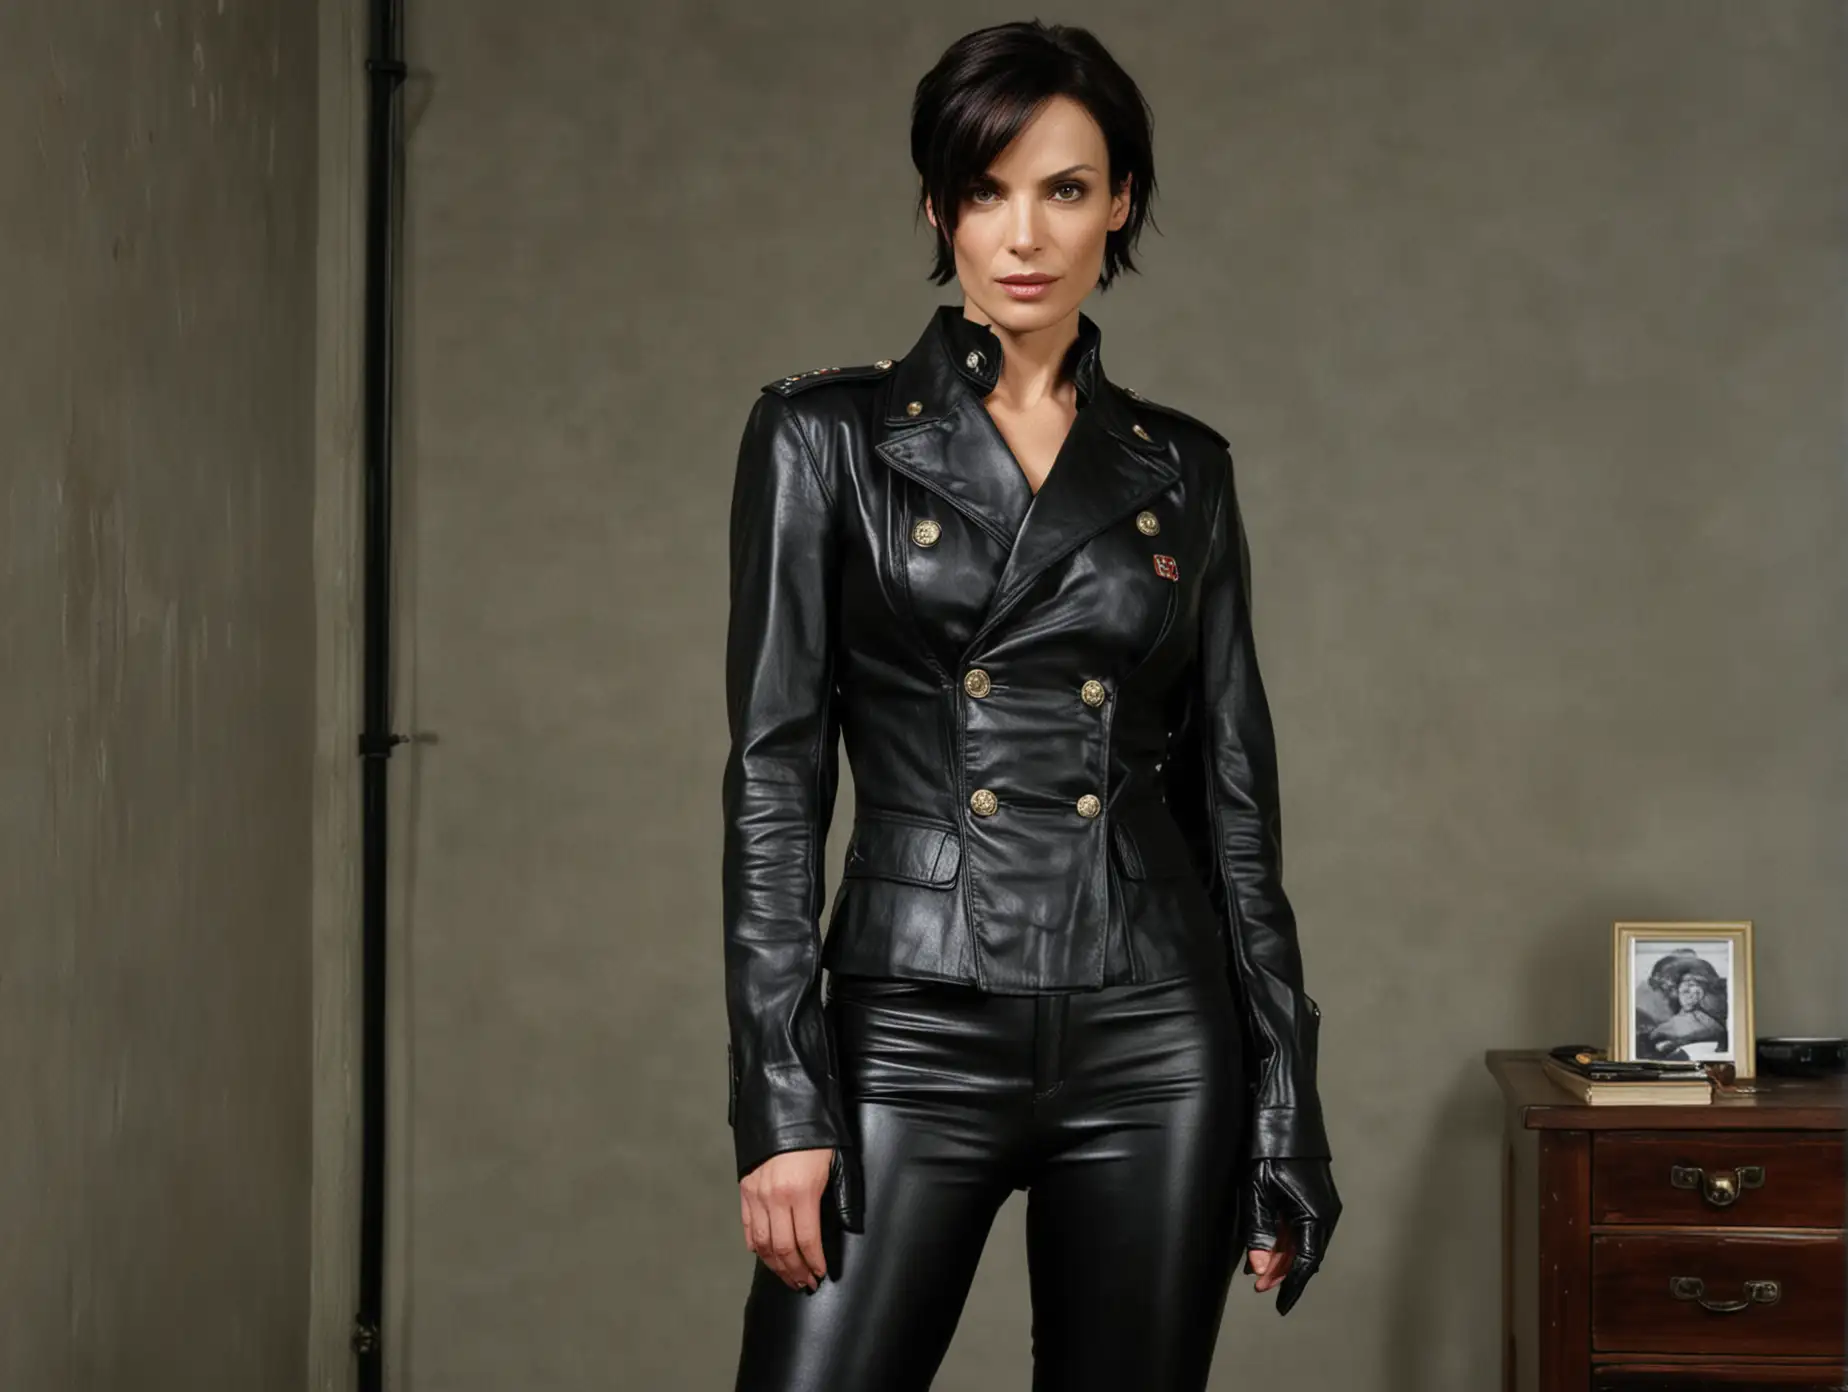 full length view of a very stern looking FAMKE JANSSEN with short hair as a MILITARY commandant, very busty with short hair wearing leather military uniform, black leather blazer leather gloves BLACK LEATHER pants STANDING in her commandant's office wearing knee length leather boots